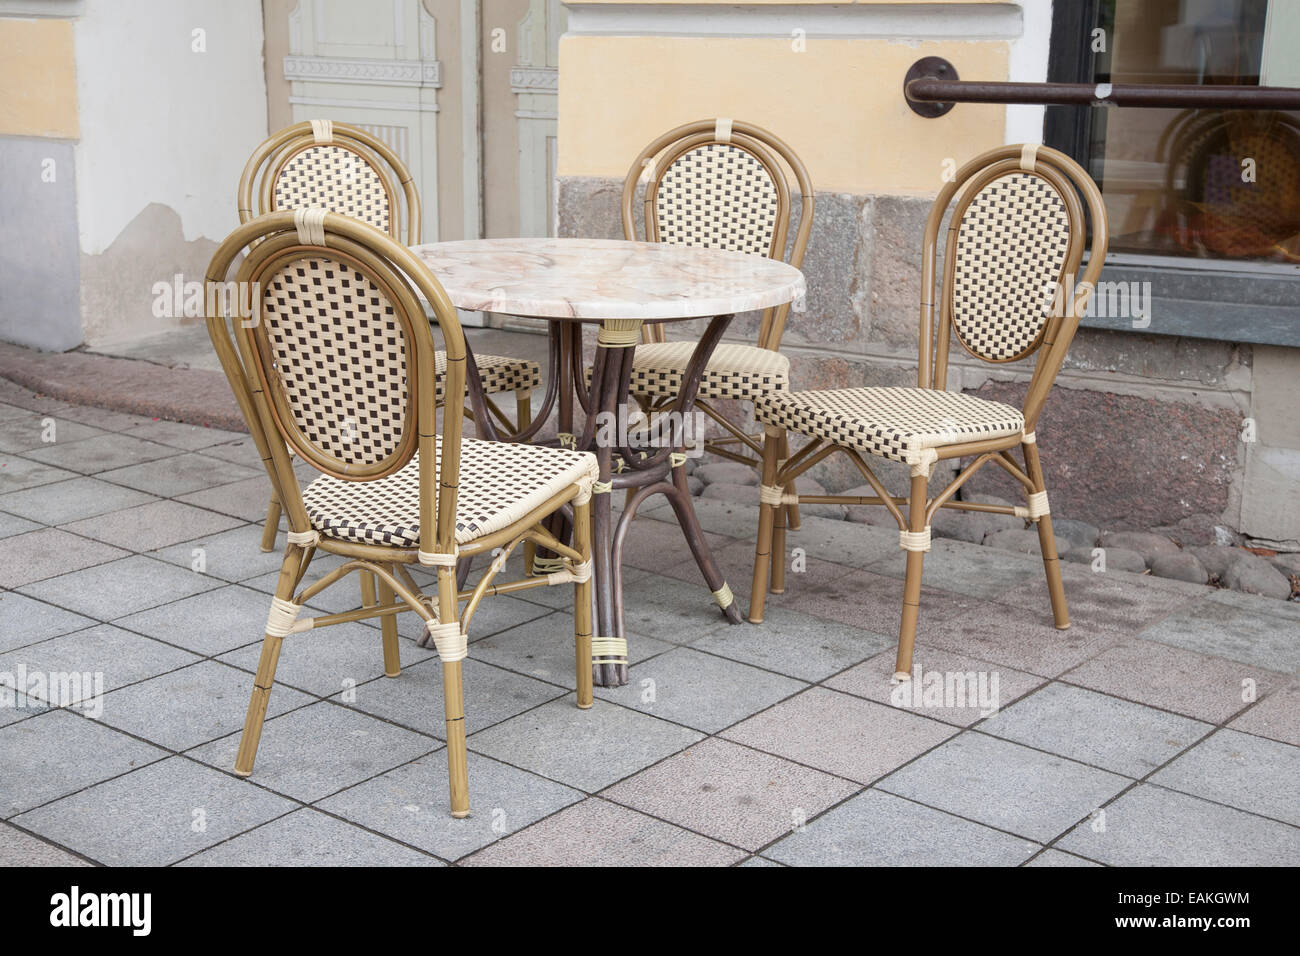 Cafe Table And Chairs In Paris Street Stock Photo 75418384 Alamy